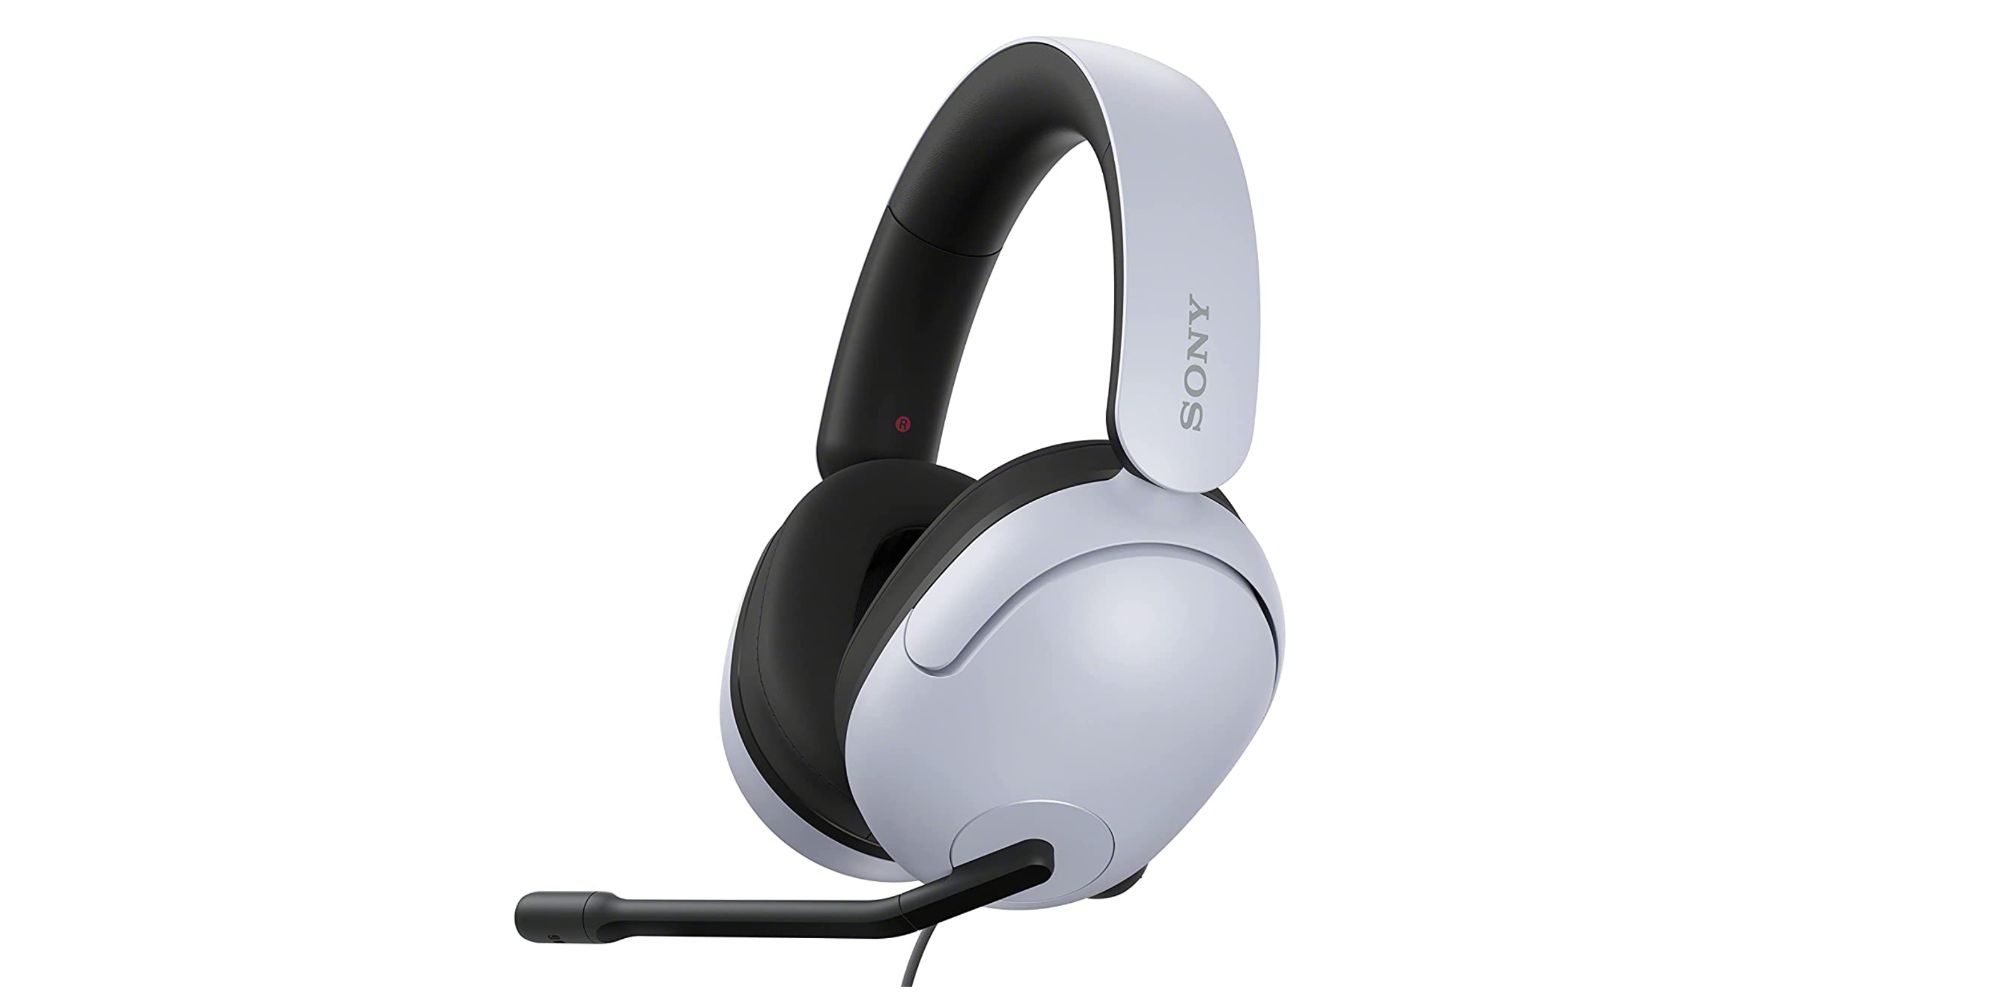 Sony-INZONE H3 Wired Gaming Headset